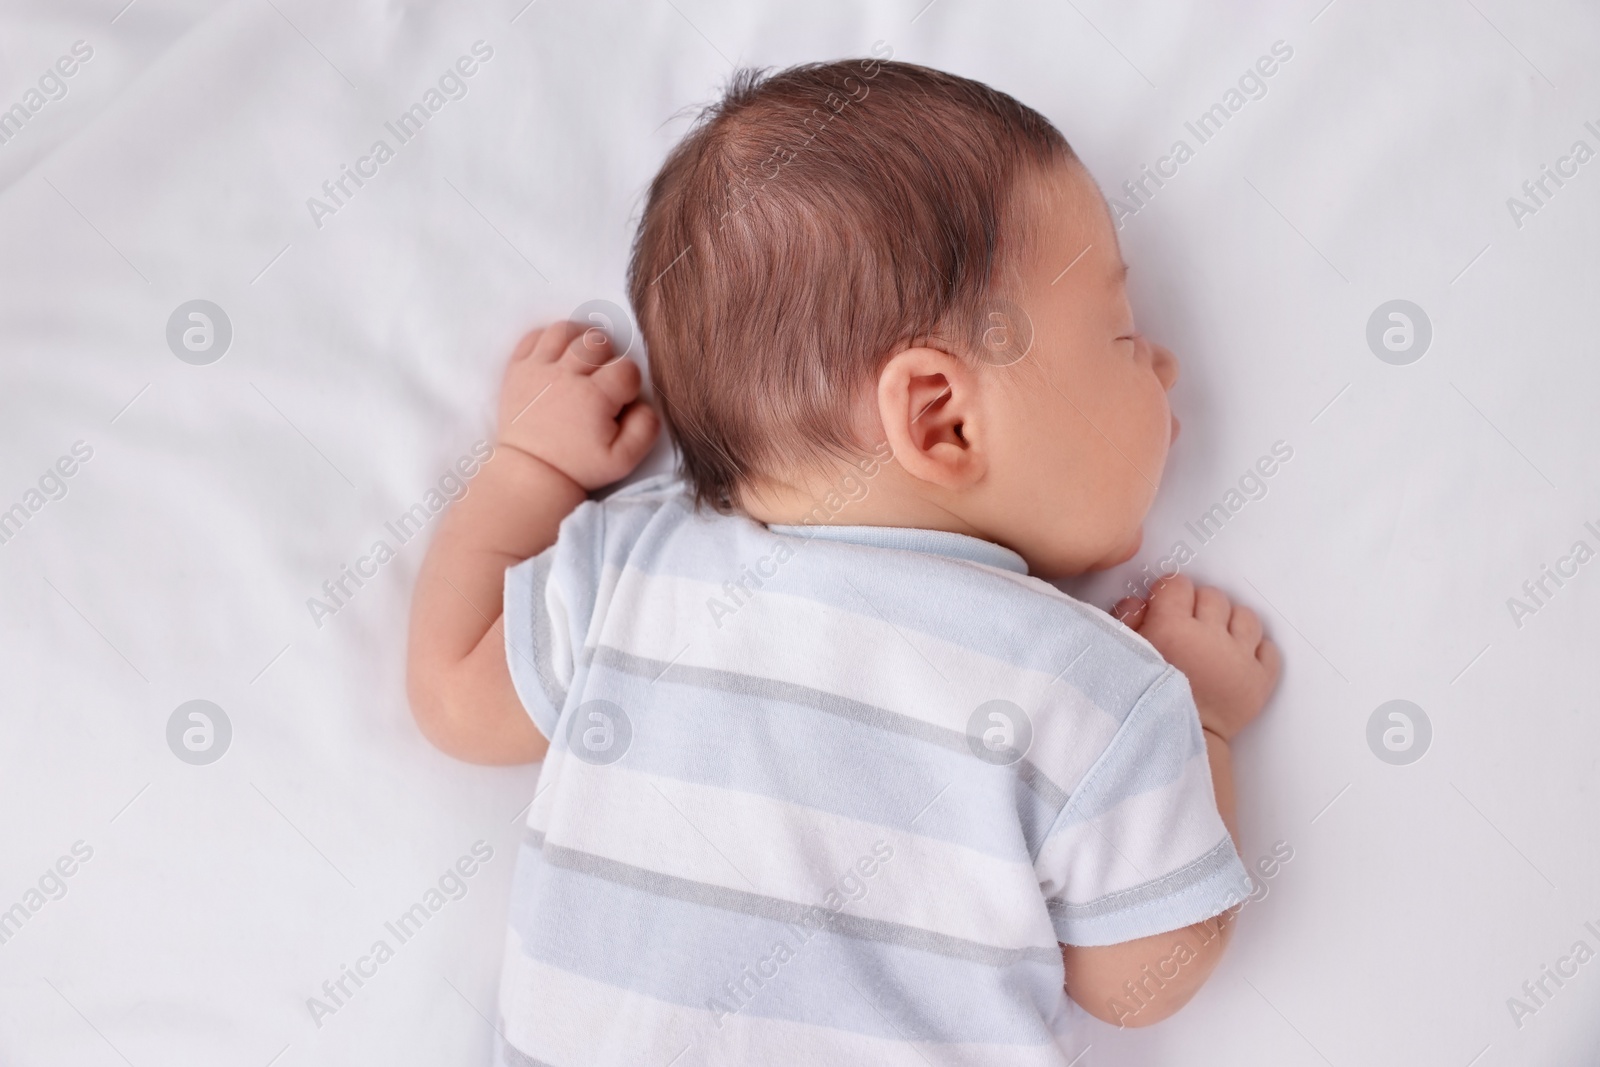 Photo of Cute newborn baby sleeping on white bed, top view